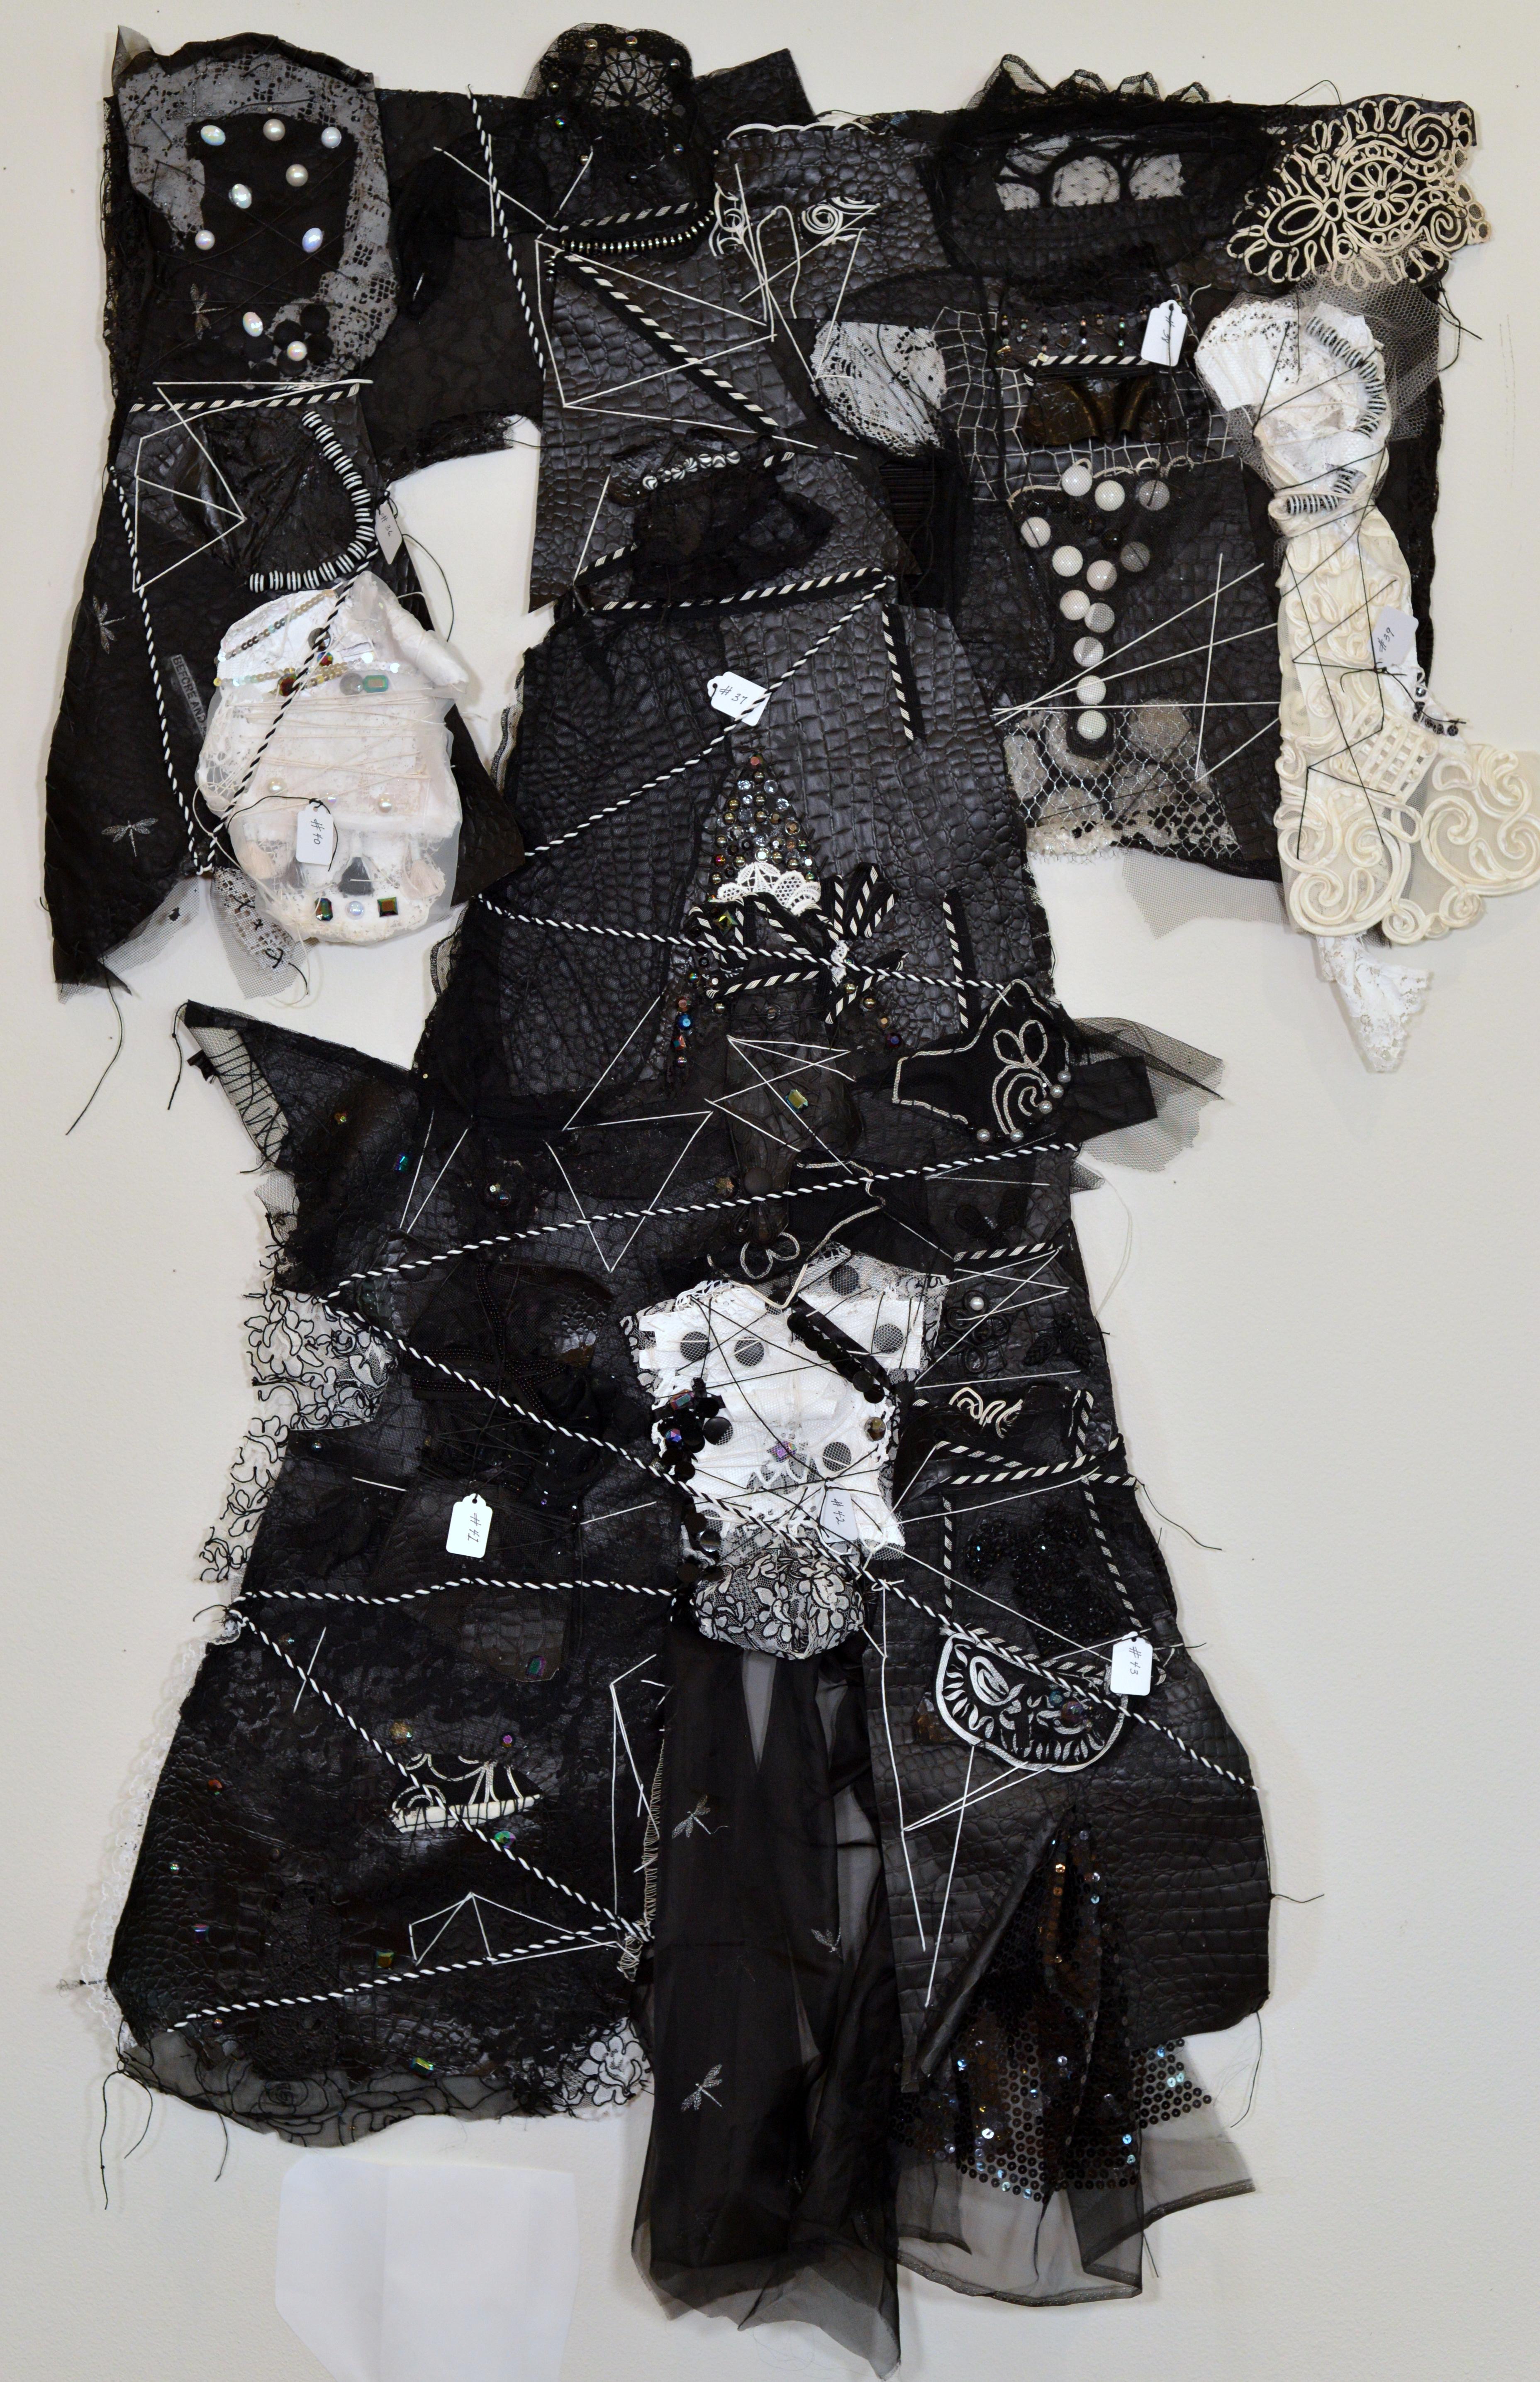 Remnants 5, Medium black and white dress with 7 small dresses sewn on - Mixed Media Art by Andrée Carter